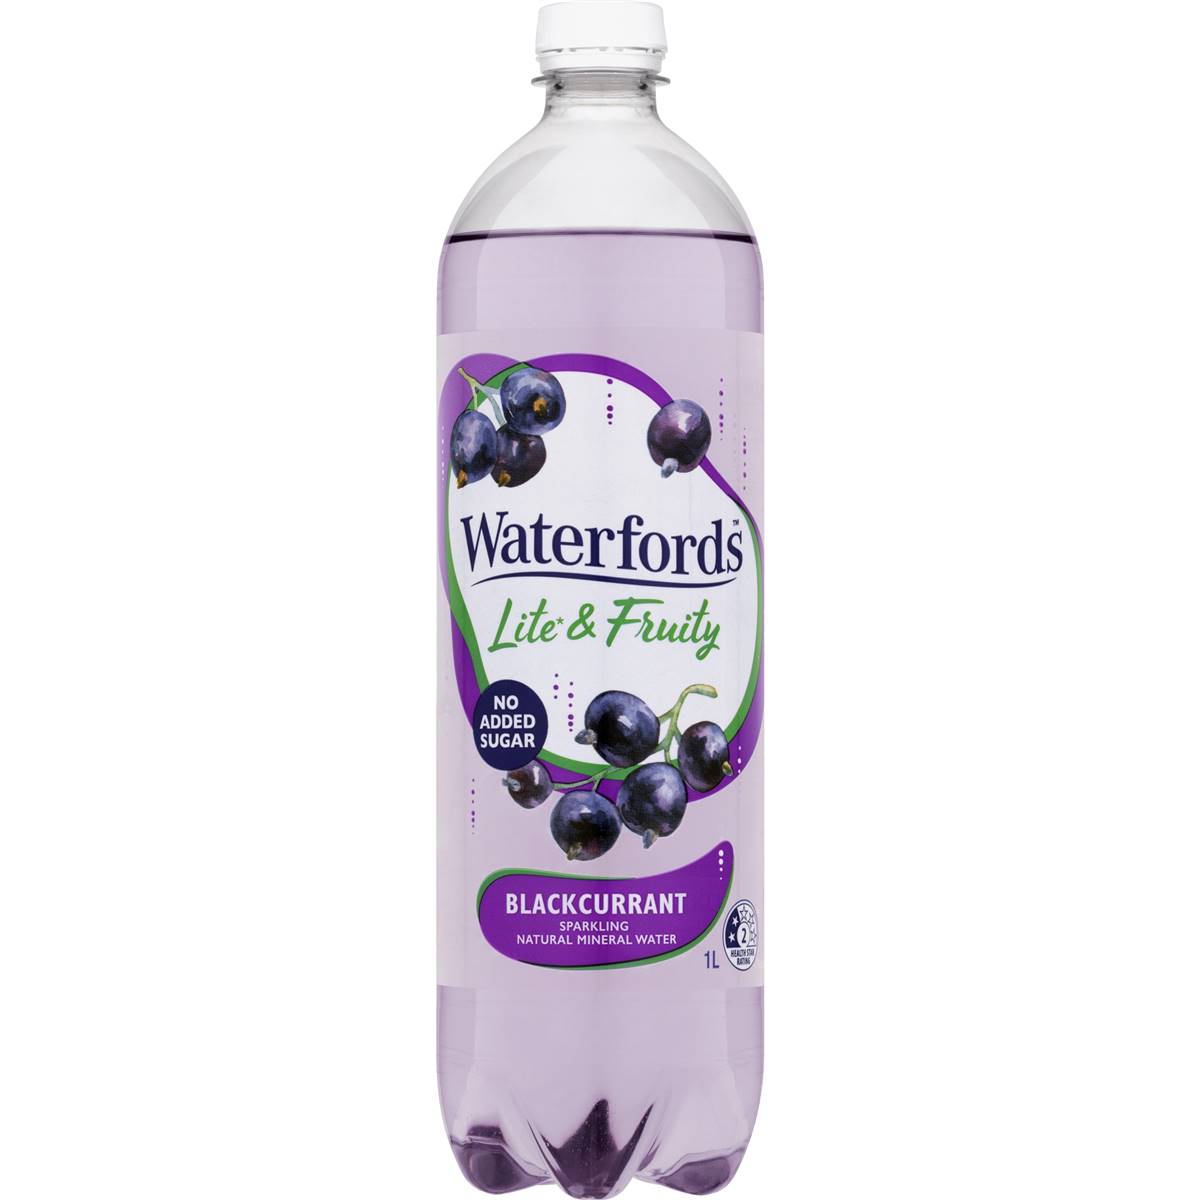 Waterfords Sparkling Mineral Water Blackcurrant 1L